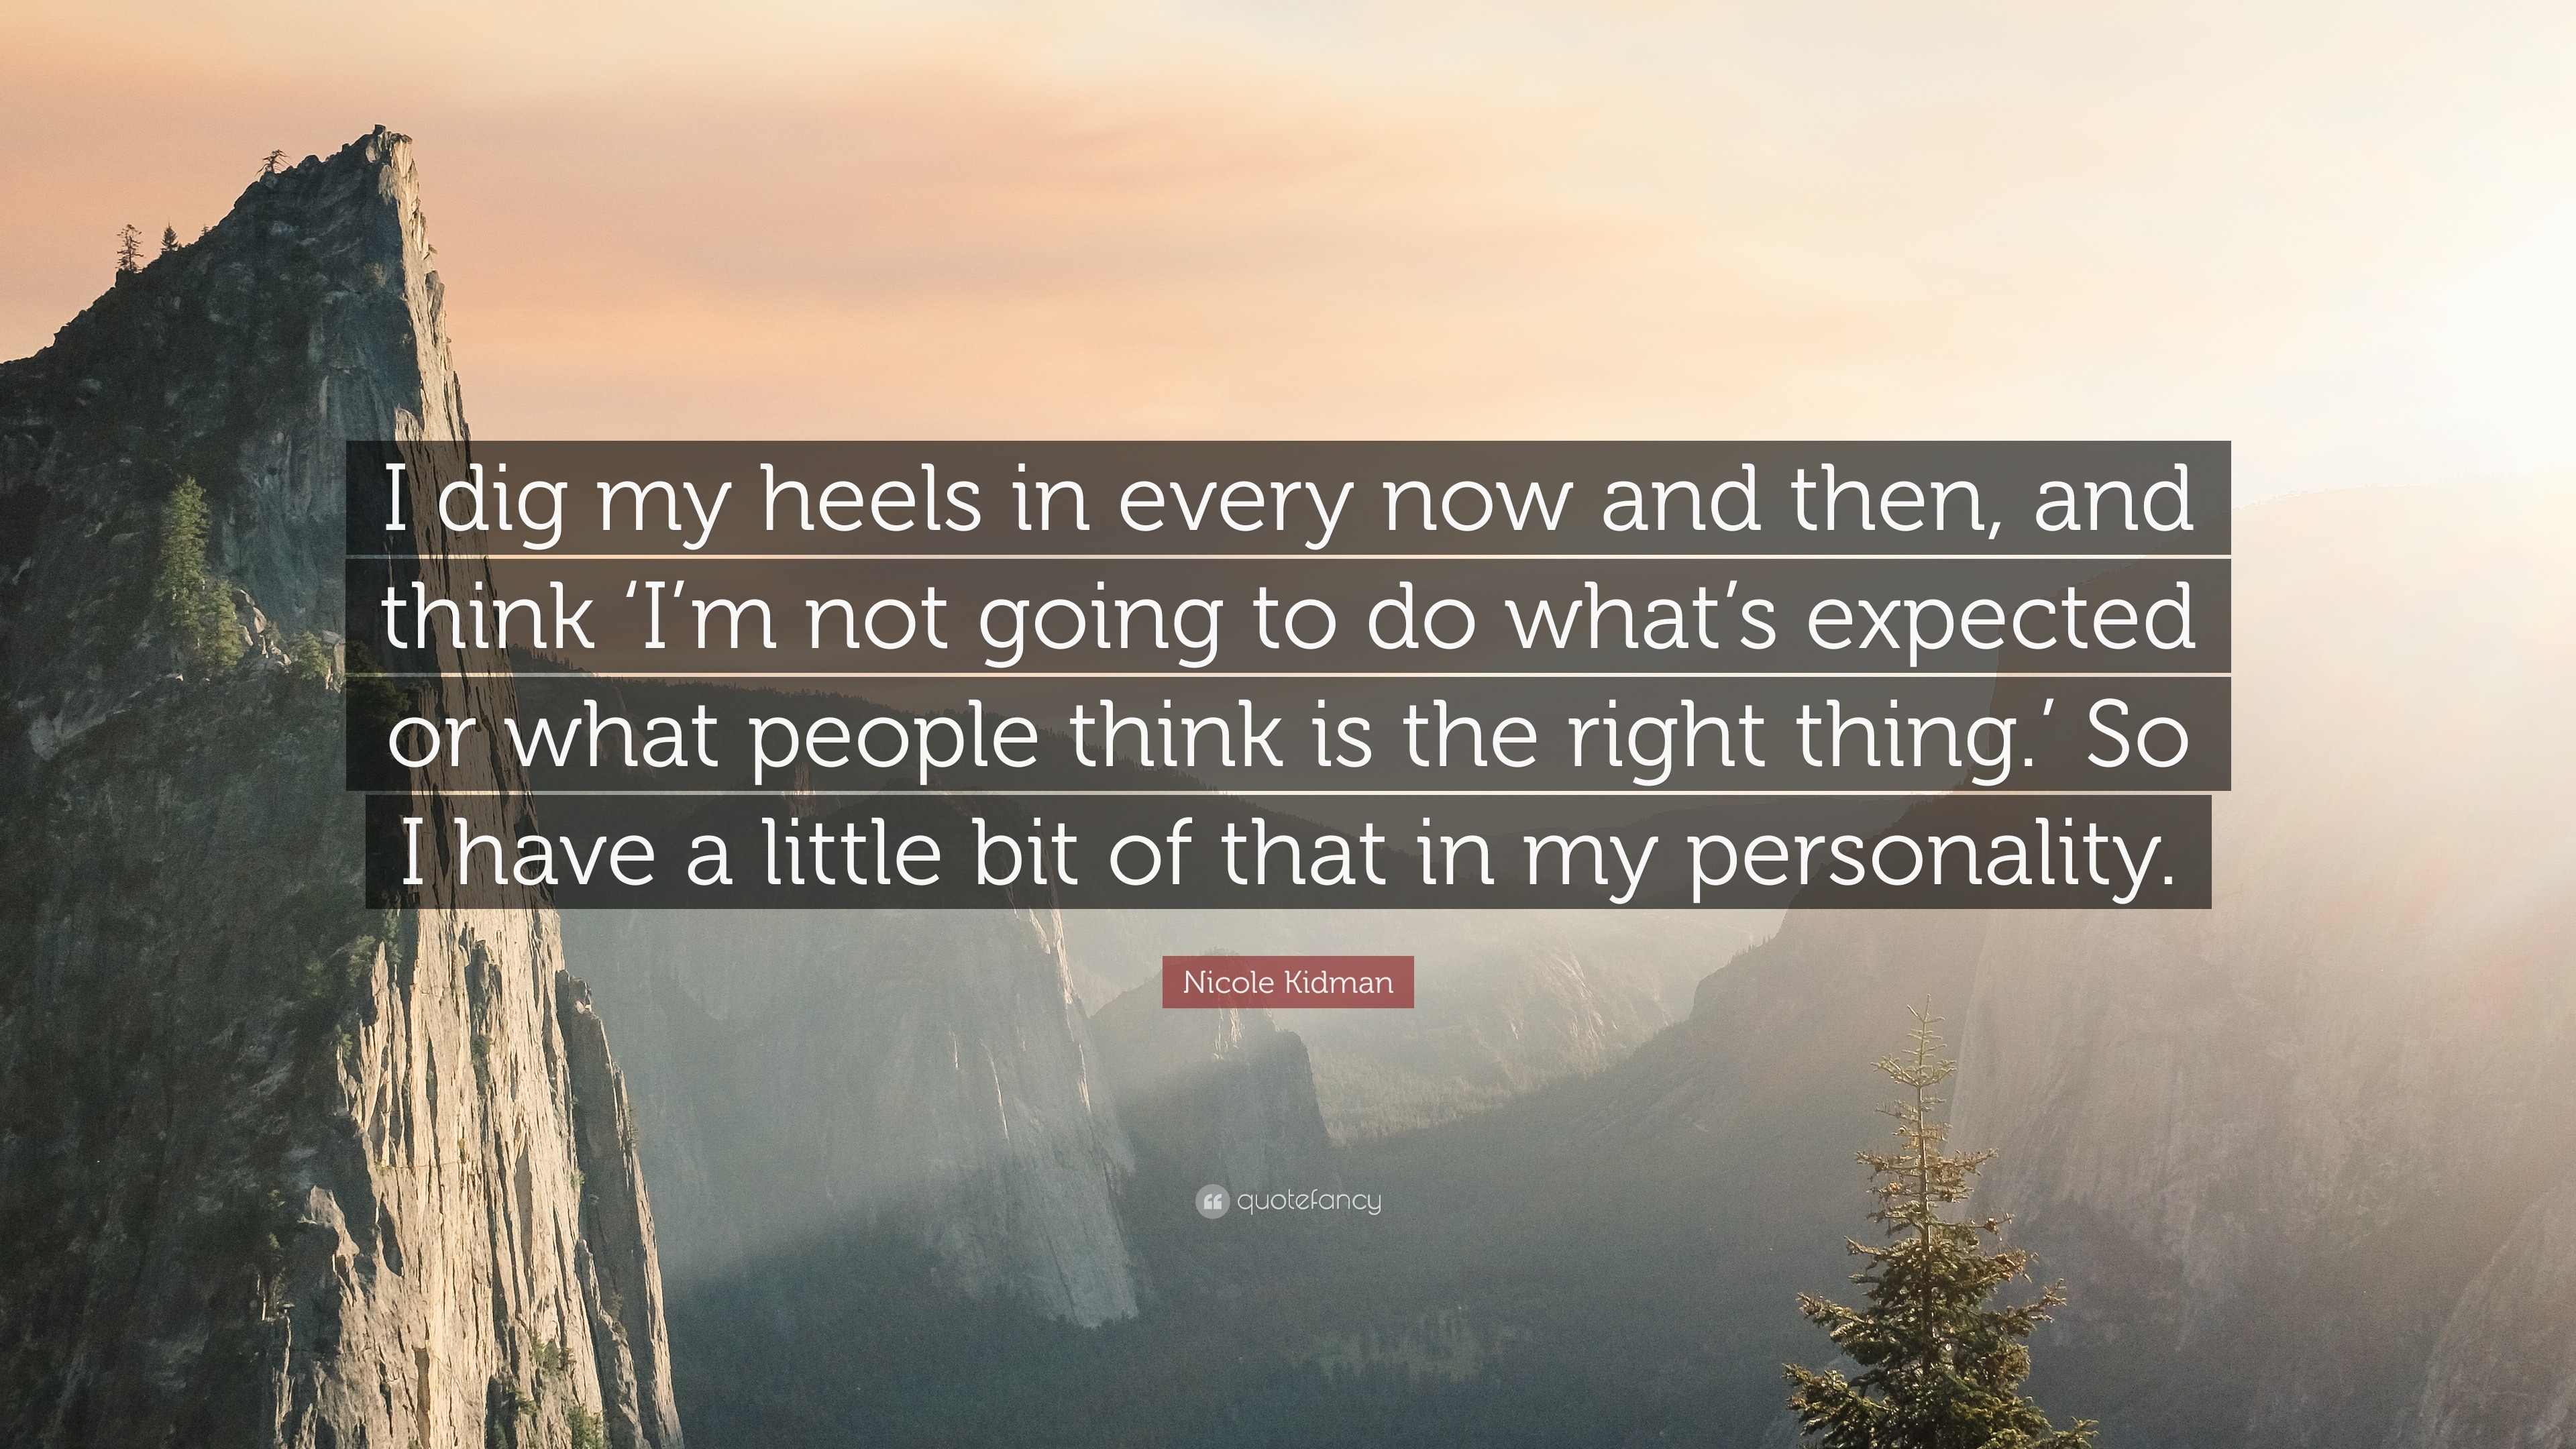 Nicole Kidman Quote “I dig my heels in every now and then, and think